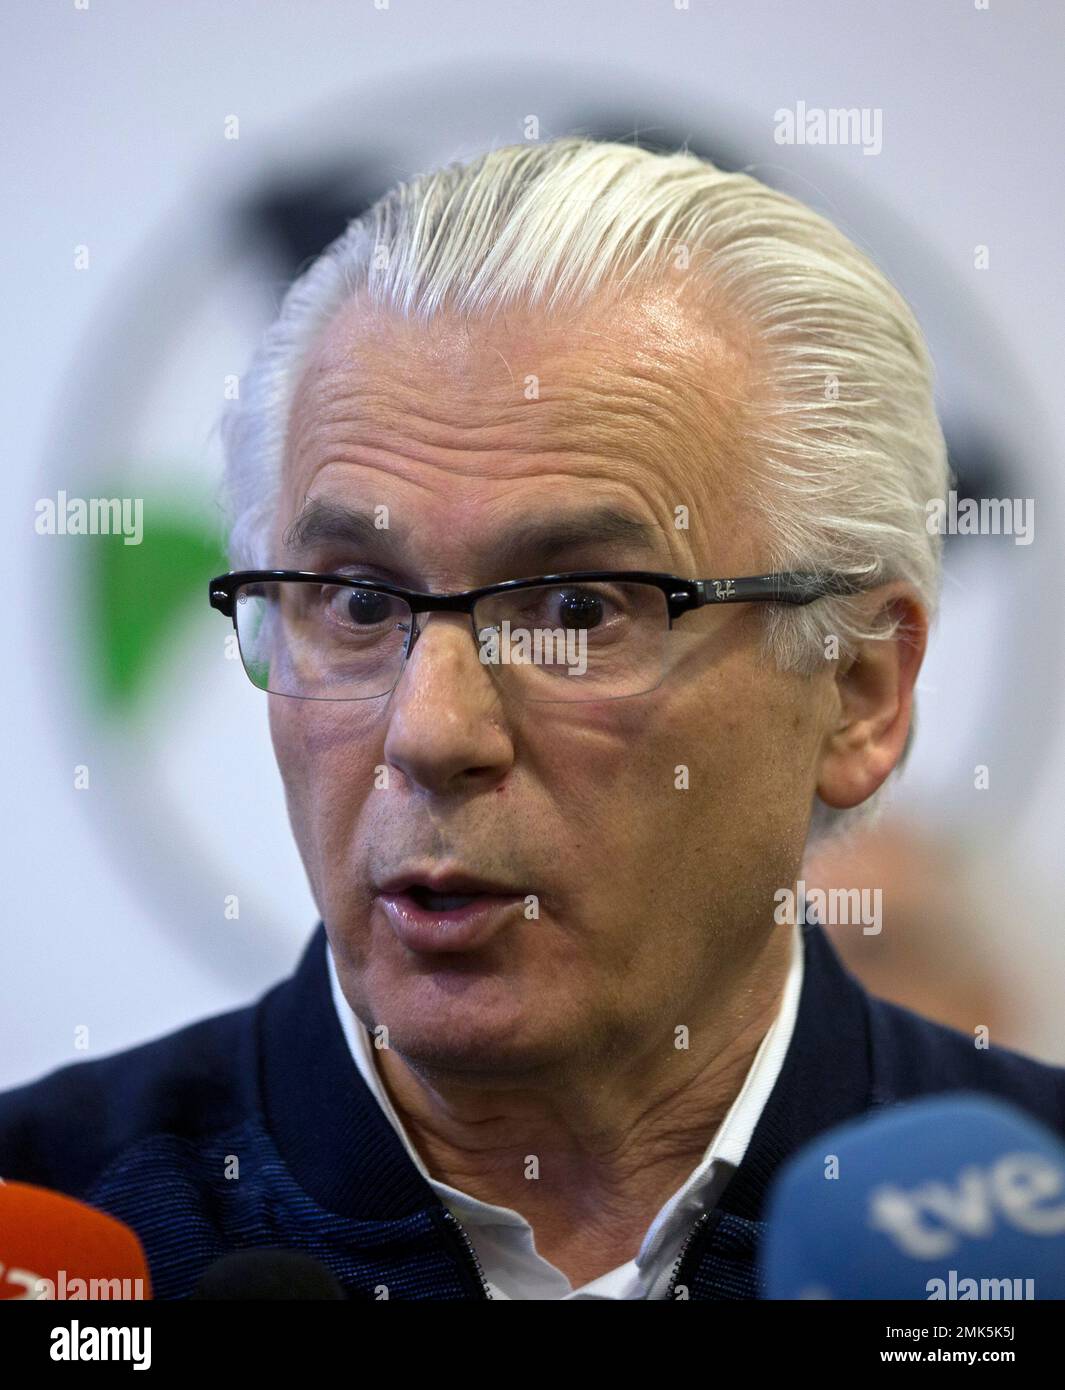 Spanish human rights lawyer and Julian Assange defense team member Baltasar  Garzon speaks with the media in Madrid, Spain, Thursday, April 11, 2019.  WikiLeaks founder Julian Assange was forcibly bundled out of